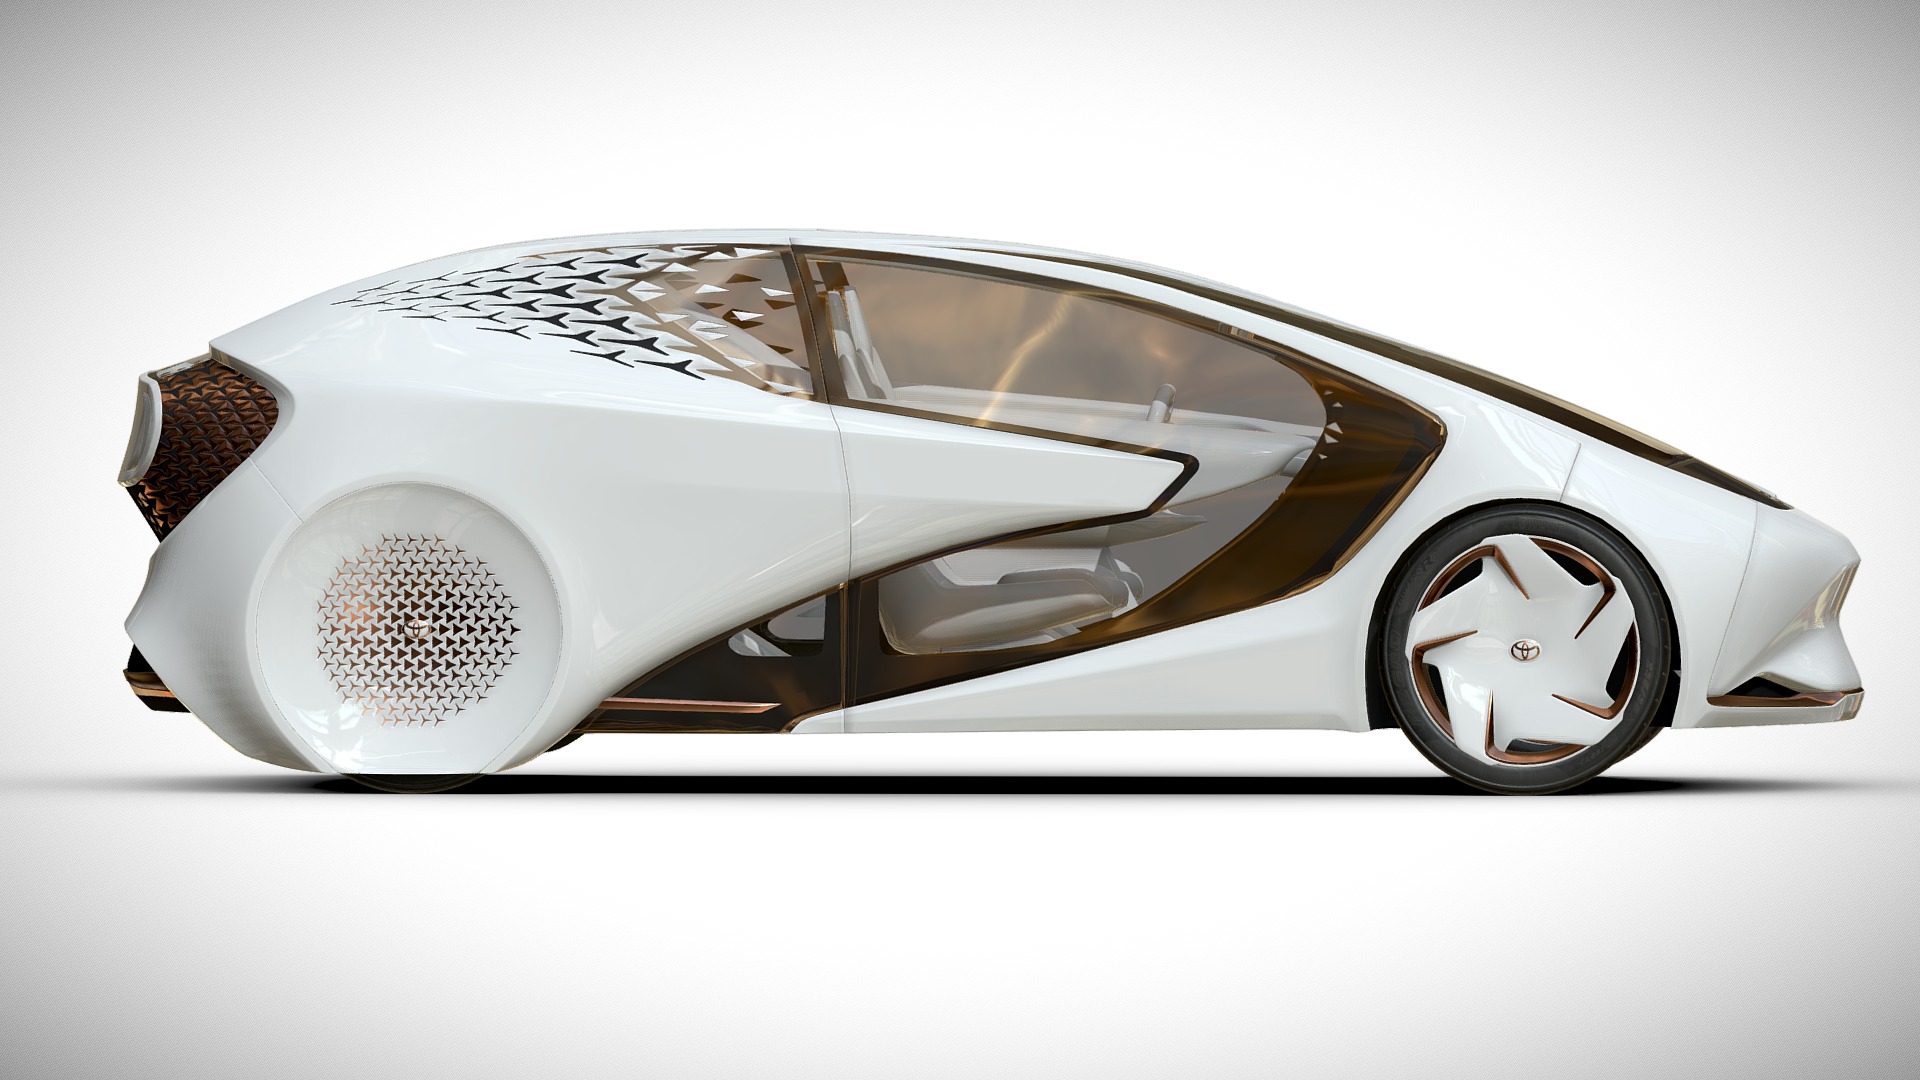 3D model Toyota Concept-i - This is a 3D model of the Toyota Concept-i. The 3D model is about a white sports car.